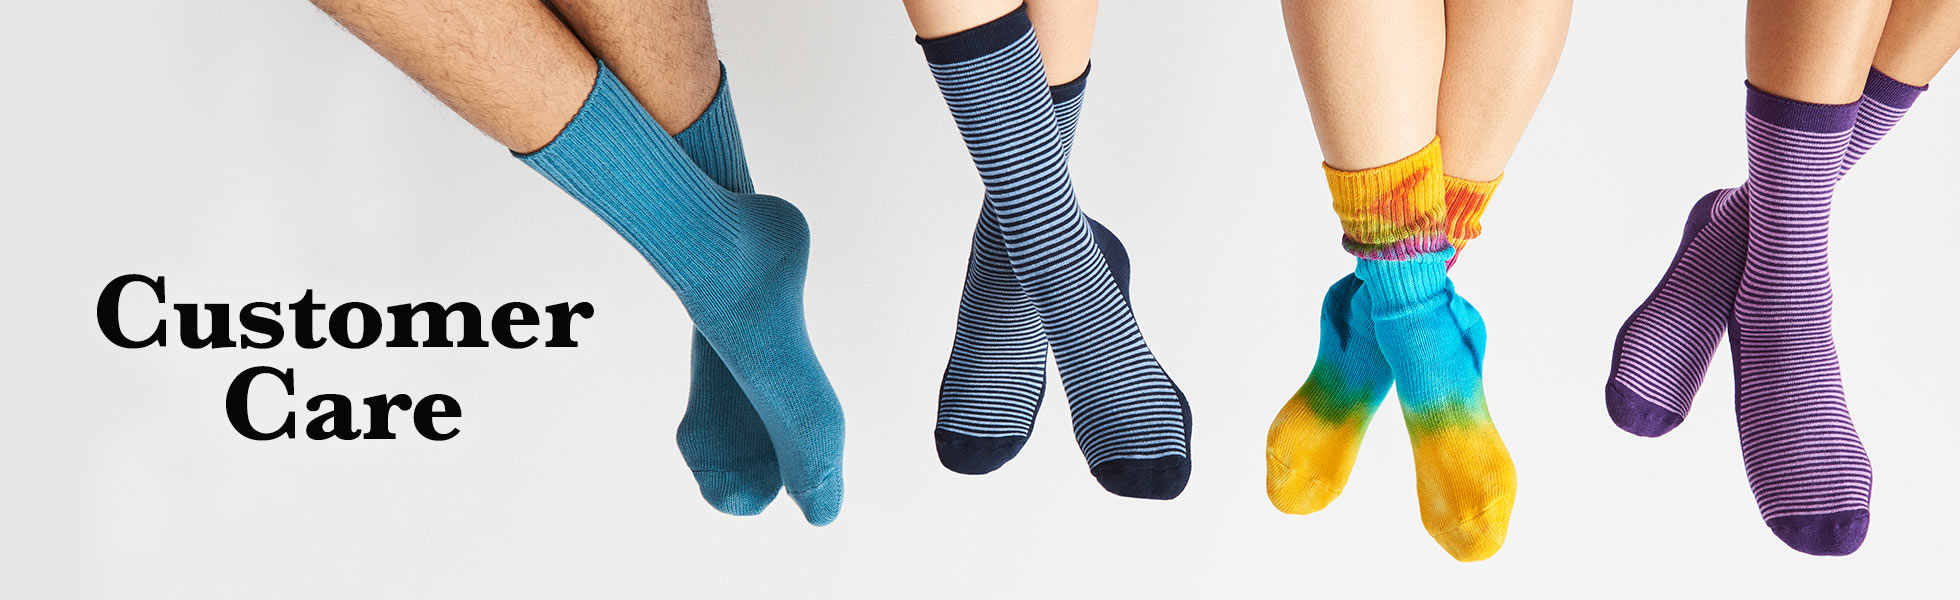 Four legs wearing socks. From left to right the first pair of socks are Denim Blue Crew, then Blue striped dress socks, Colorful Tie Dye Crew socks, and finally purple striped dress socks. Text next to the four legs reads: Customer Care.